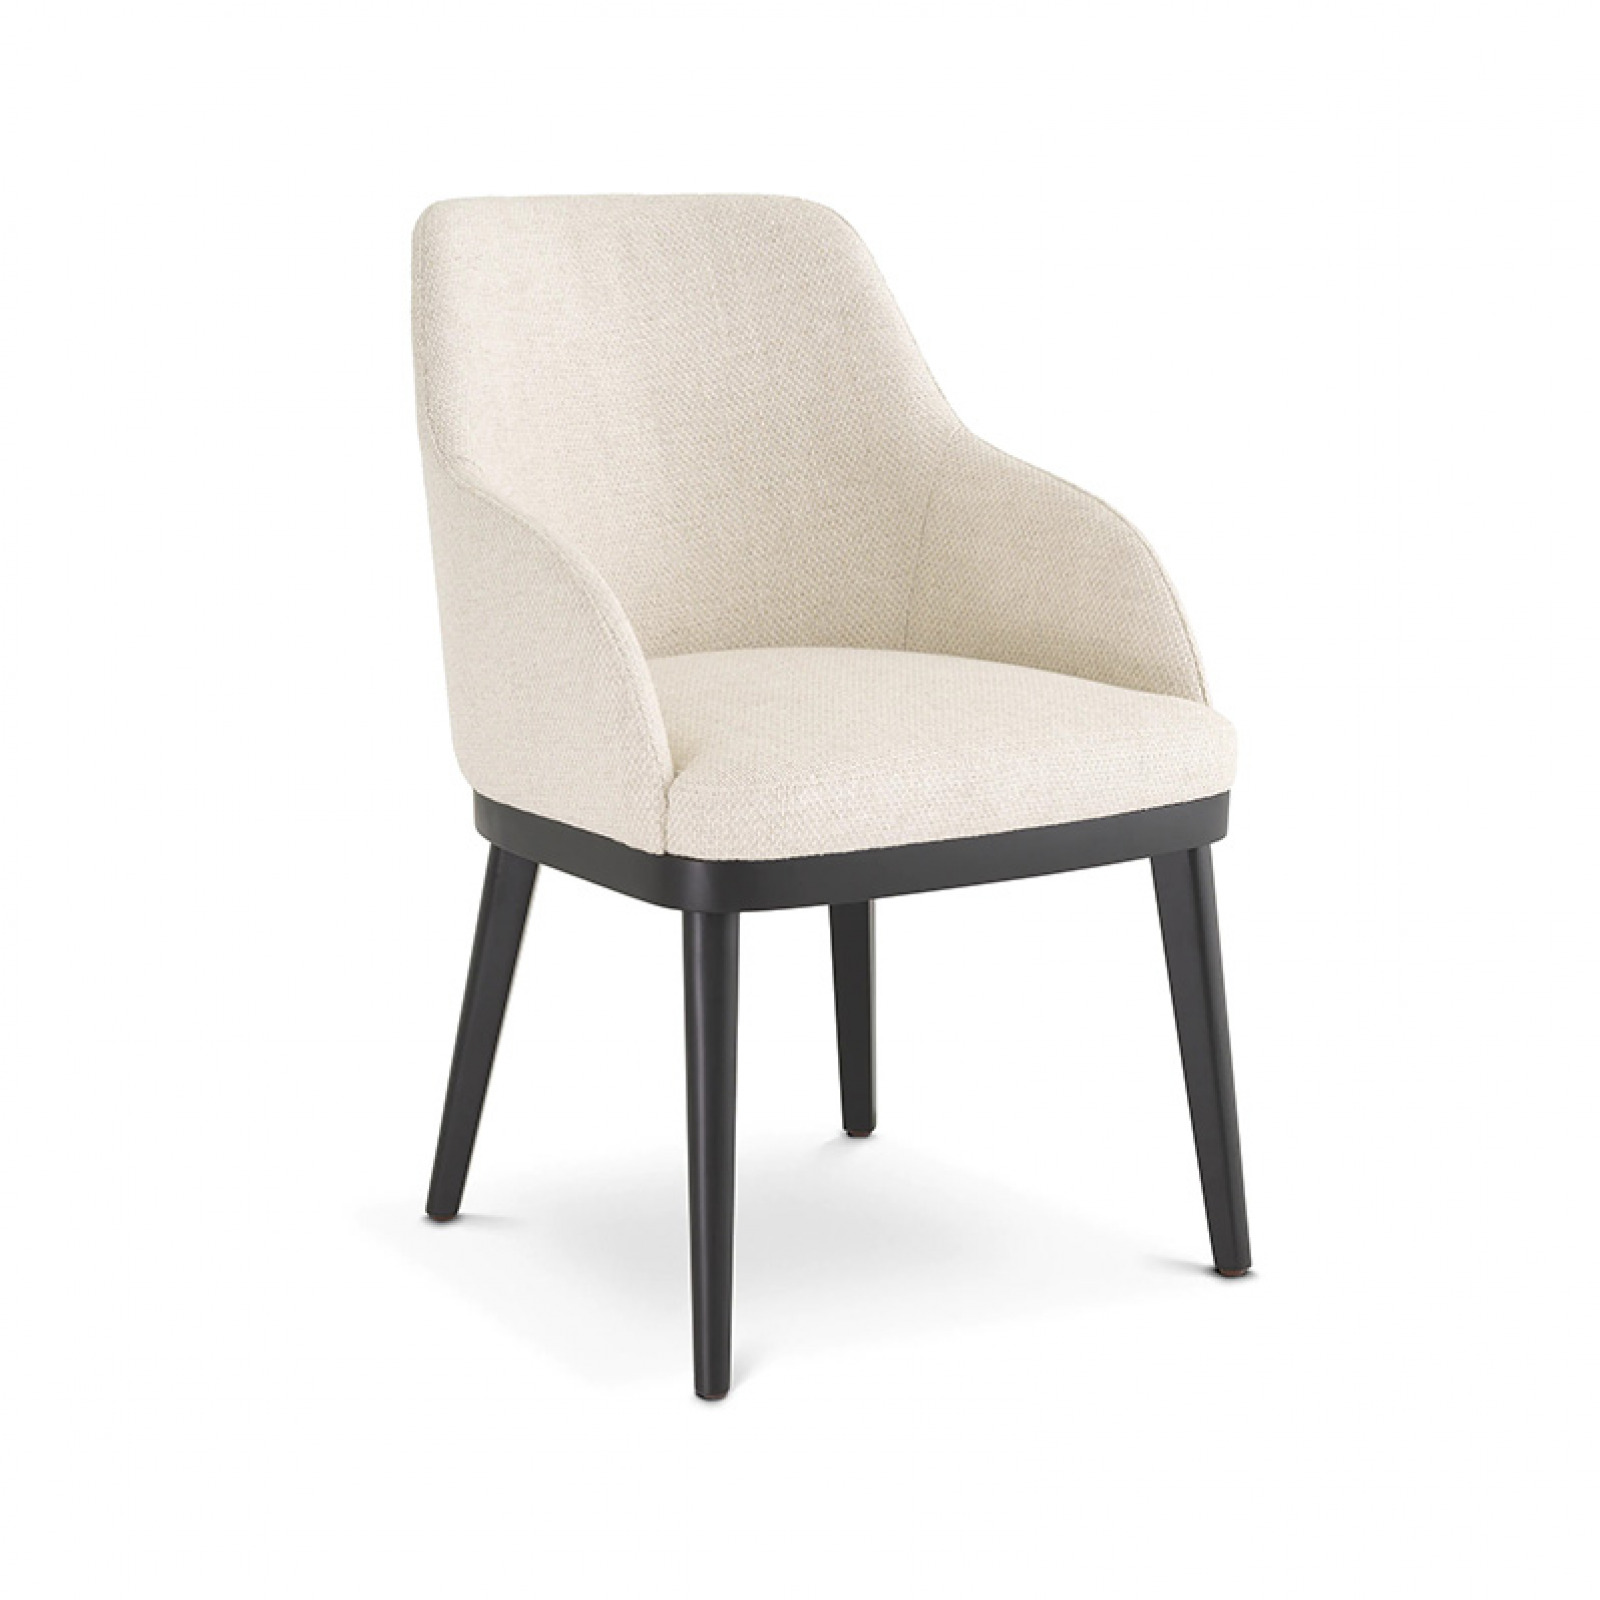 Costa dining chair